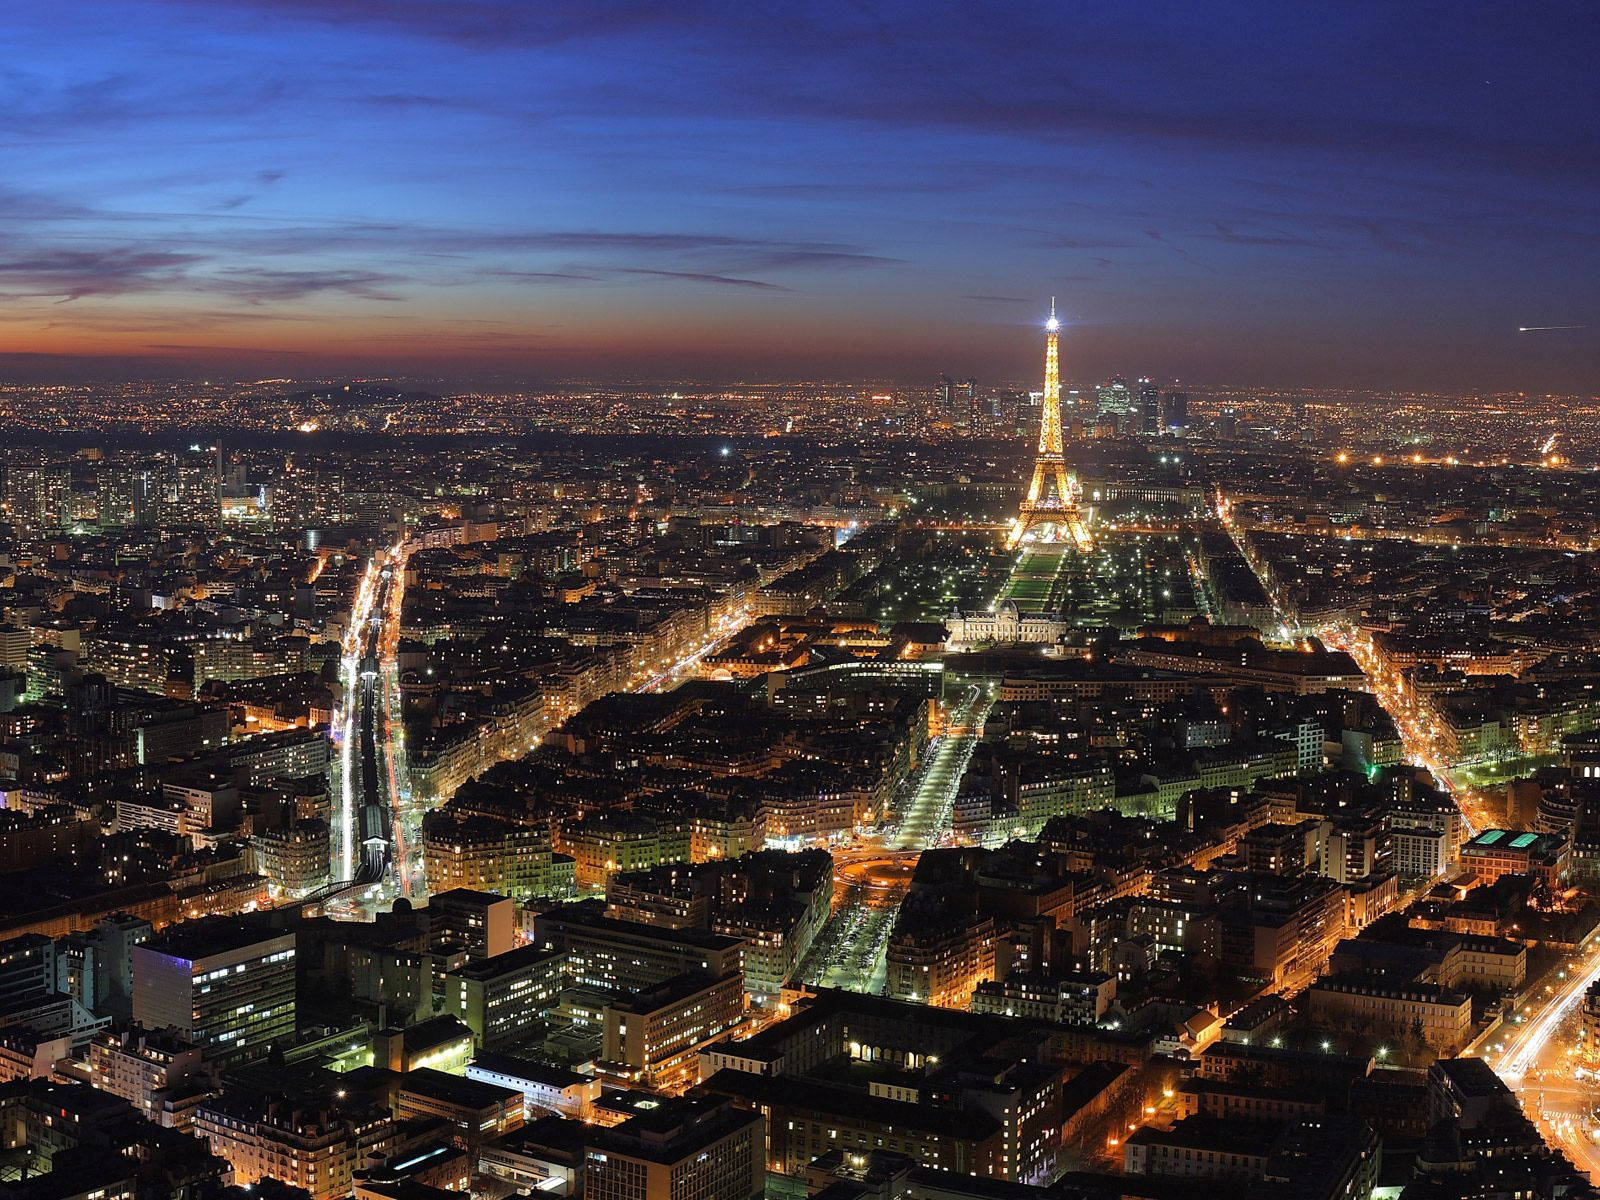 Aerial Night View Of The City Of Lights - Paris, France